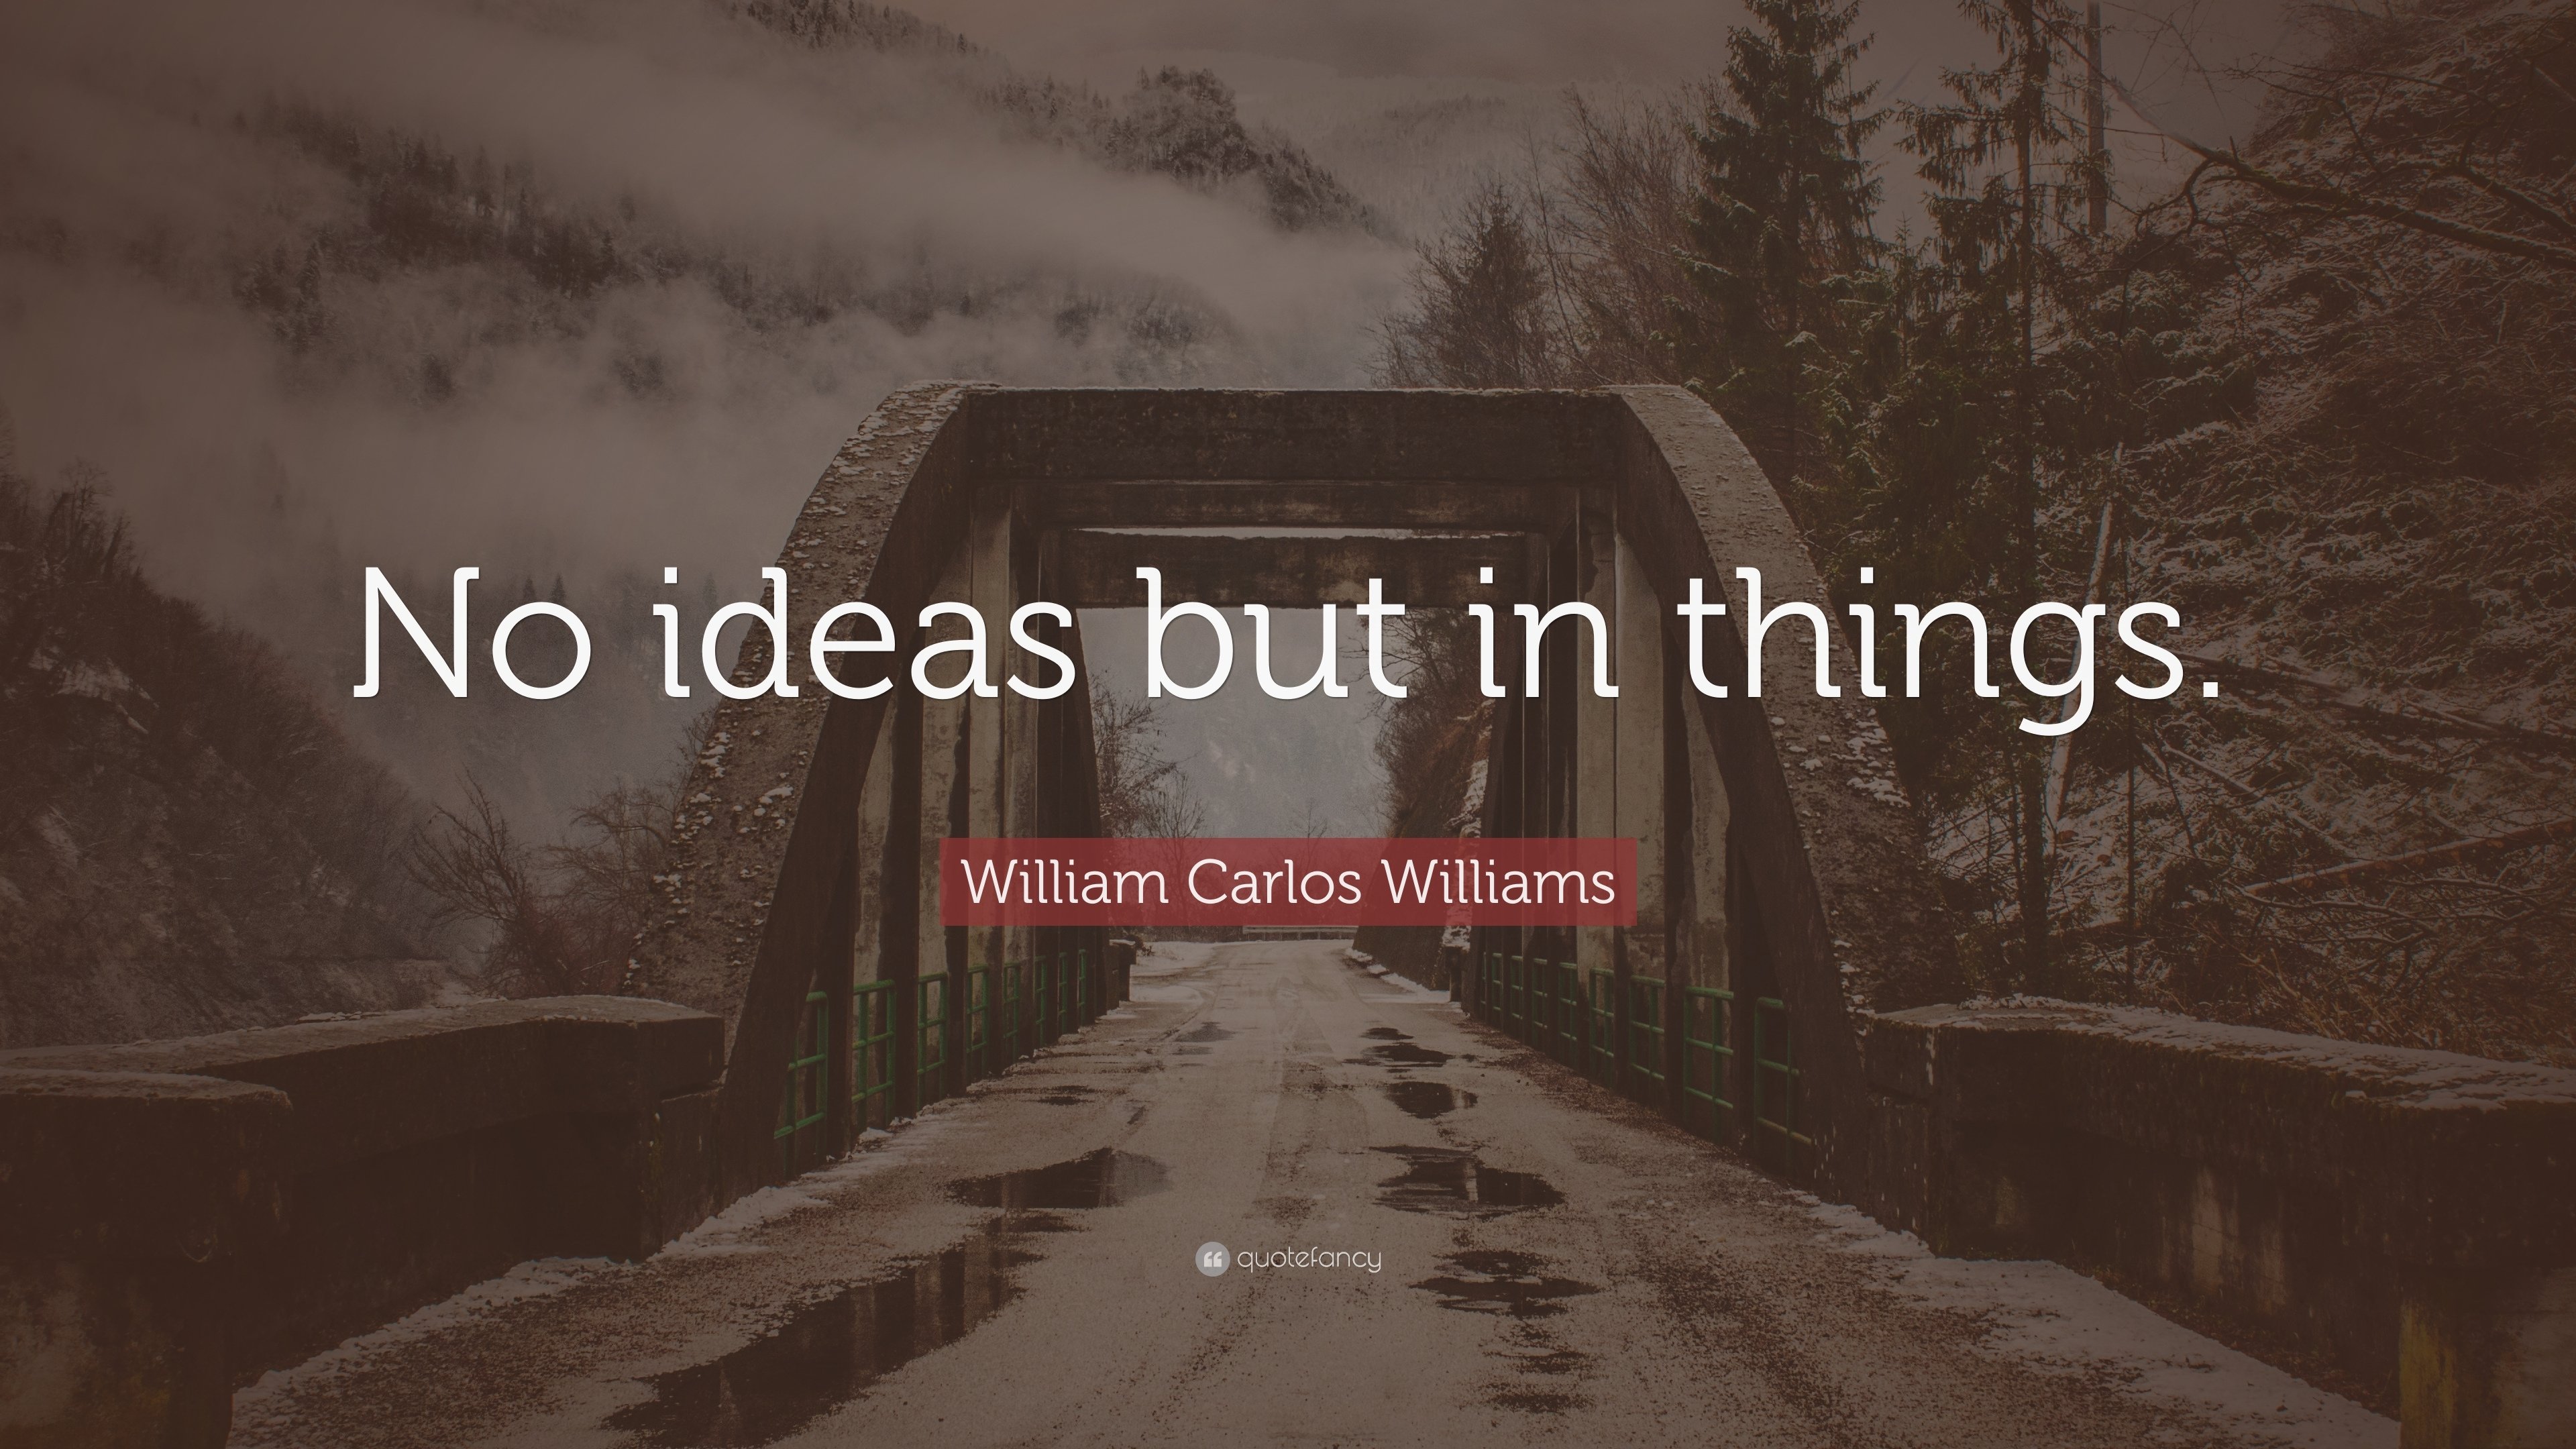 10 Fabulous No Ideas But In Things william carlos williams quote no ideas but in things 7 2 2022